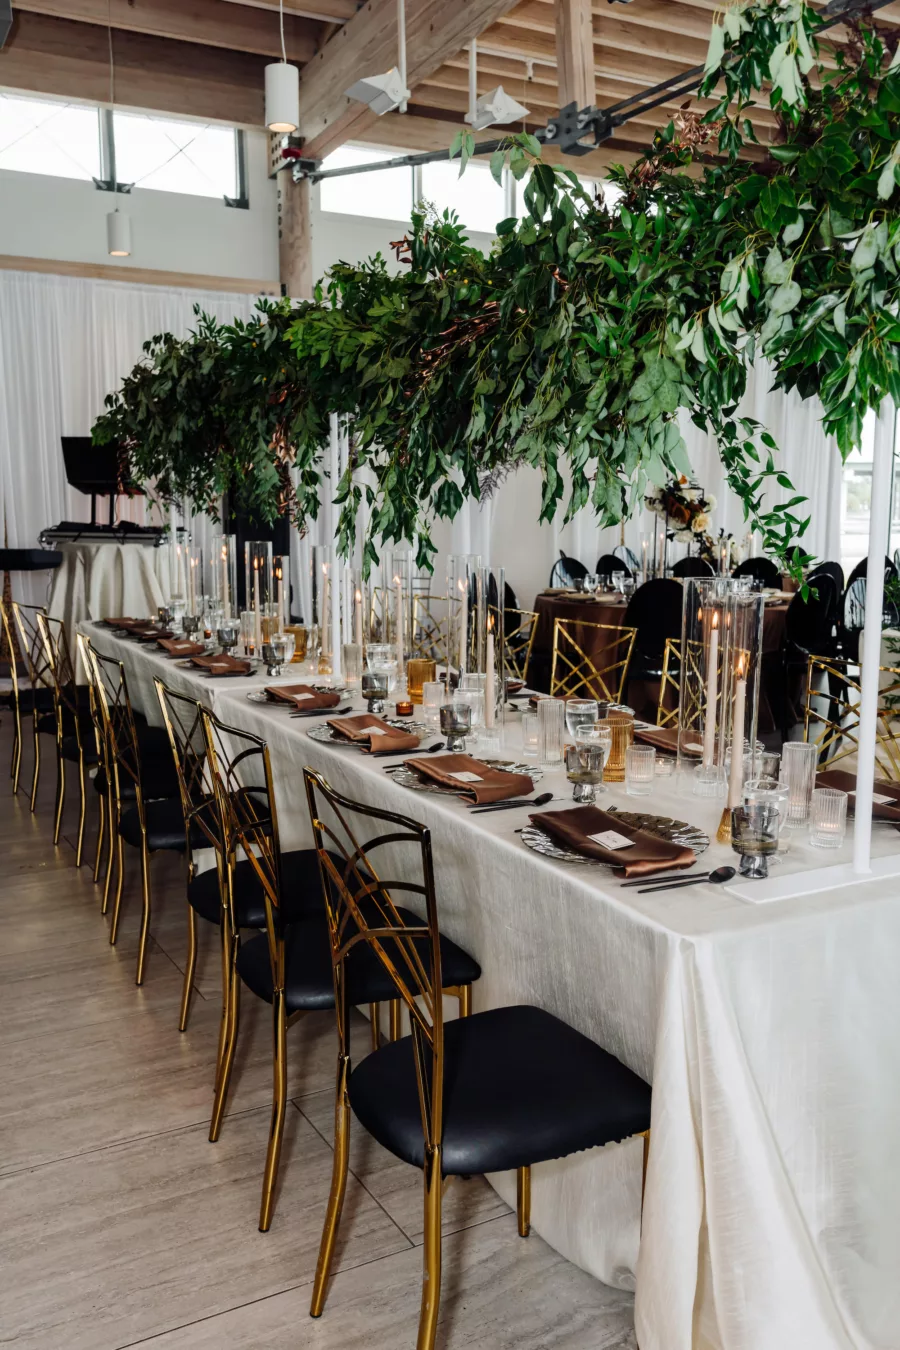 Modern Black and Bronze Wedding Reception Decor Inspiration | Cascading Greenery Over Feasting Table Ideas | Tampa Bay Kate Ryan Event Rentals | A Chair Affair